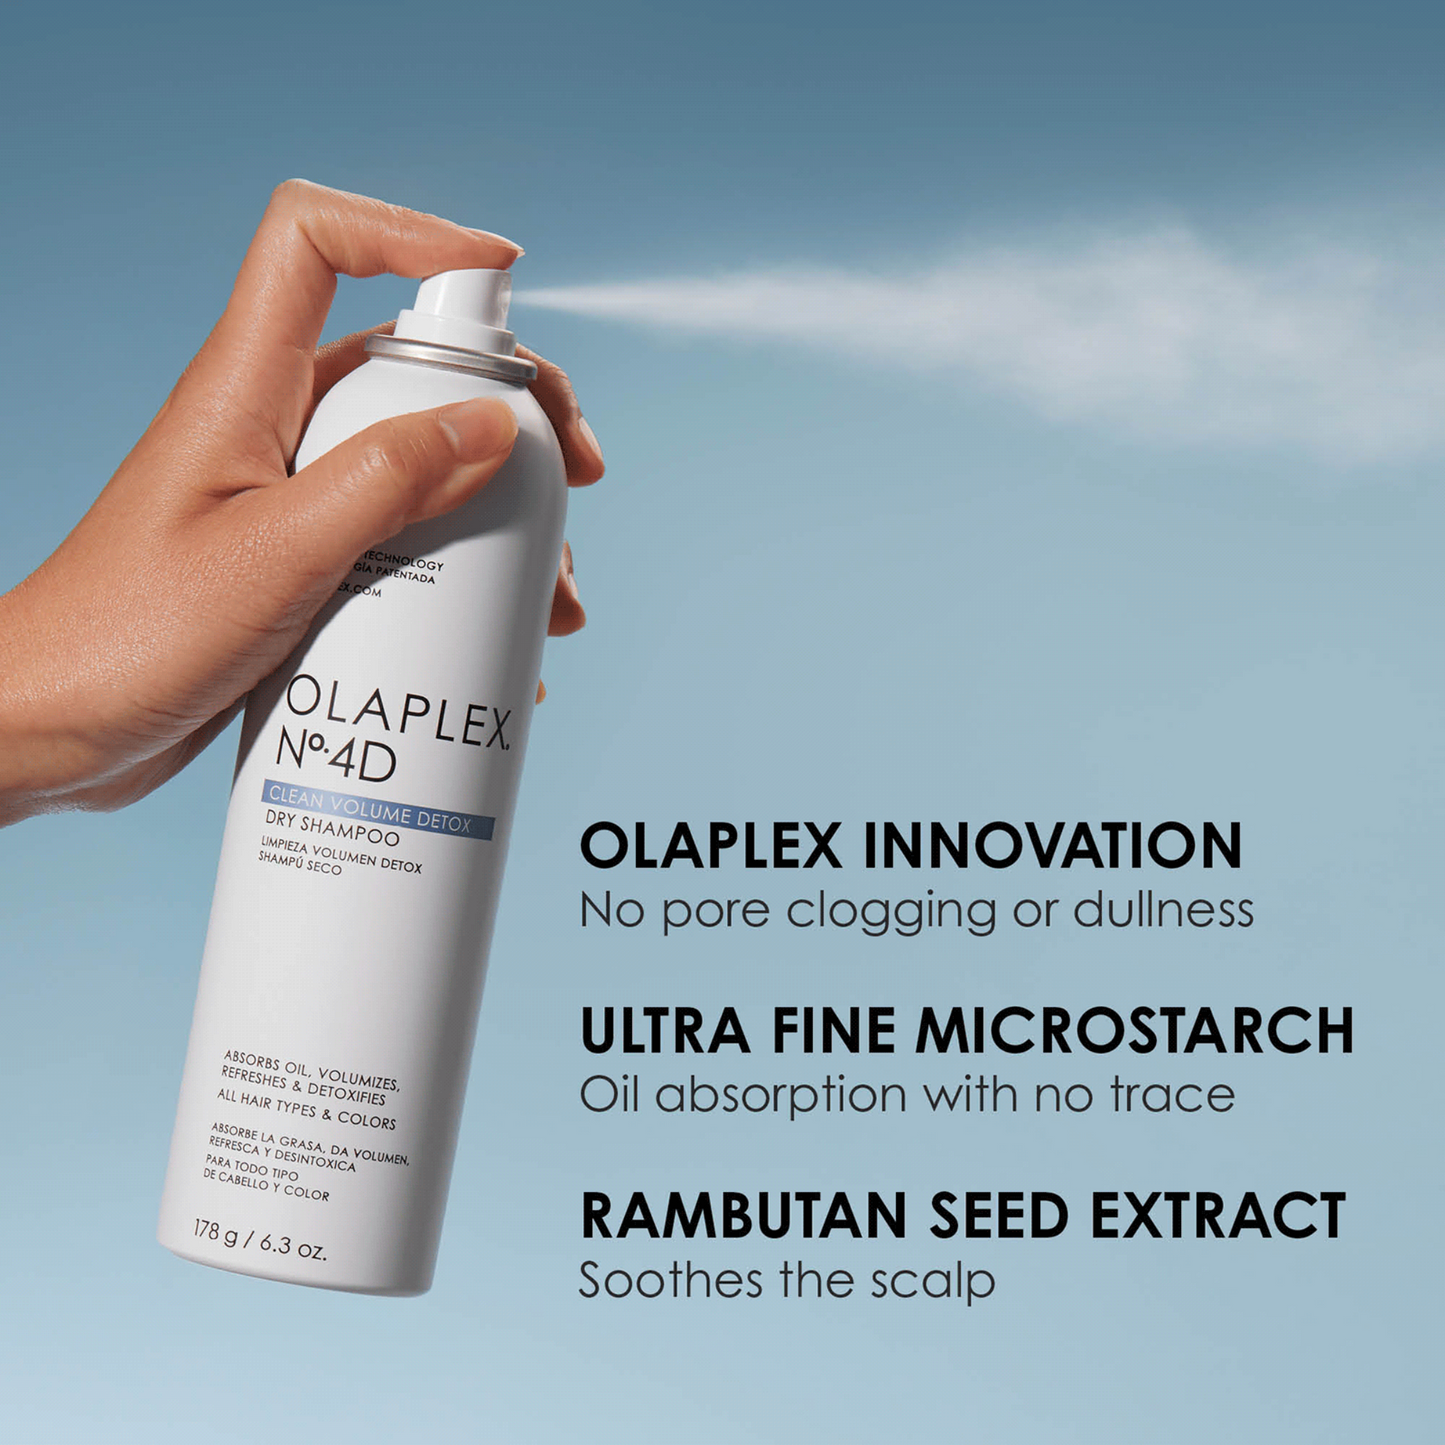 Clean, weightless body. Detoxifies scalp. No grit or powdery residue. No clogged follicles. Key Ingredients: RAMBUTAN SEED EXTRACT: A sustainable source of antioxidants that detoxifies, soothes the scalp, and neutralizes odor-causing pollutants and impurities. ULTRA-FINE MICRO STARCH: Delivers powerhouse oil absorption for clean, weightless body without a trace of white residue or pore-clogging buildup. Formulated with patented OLAPLEX Bond Building Technology™.